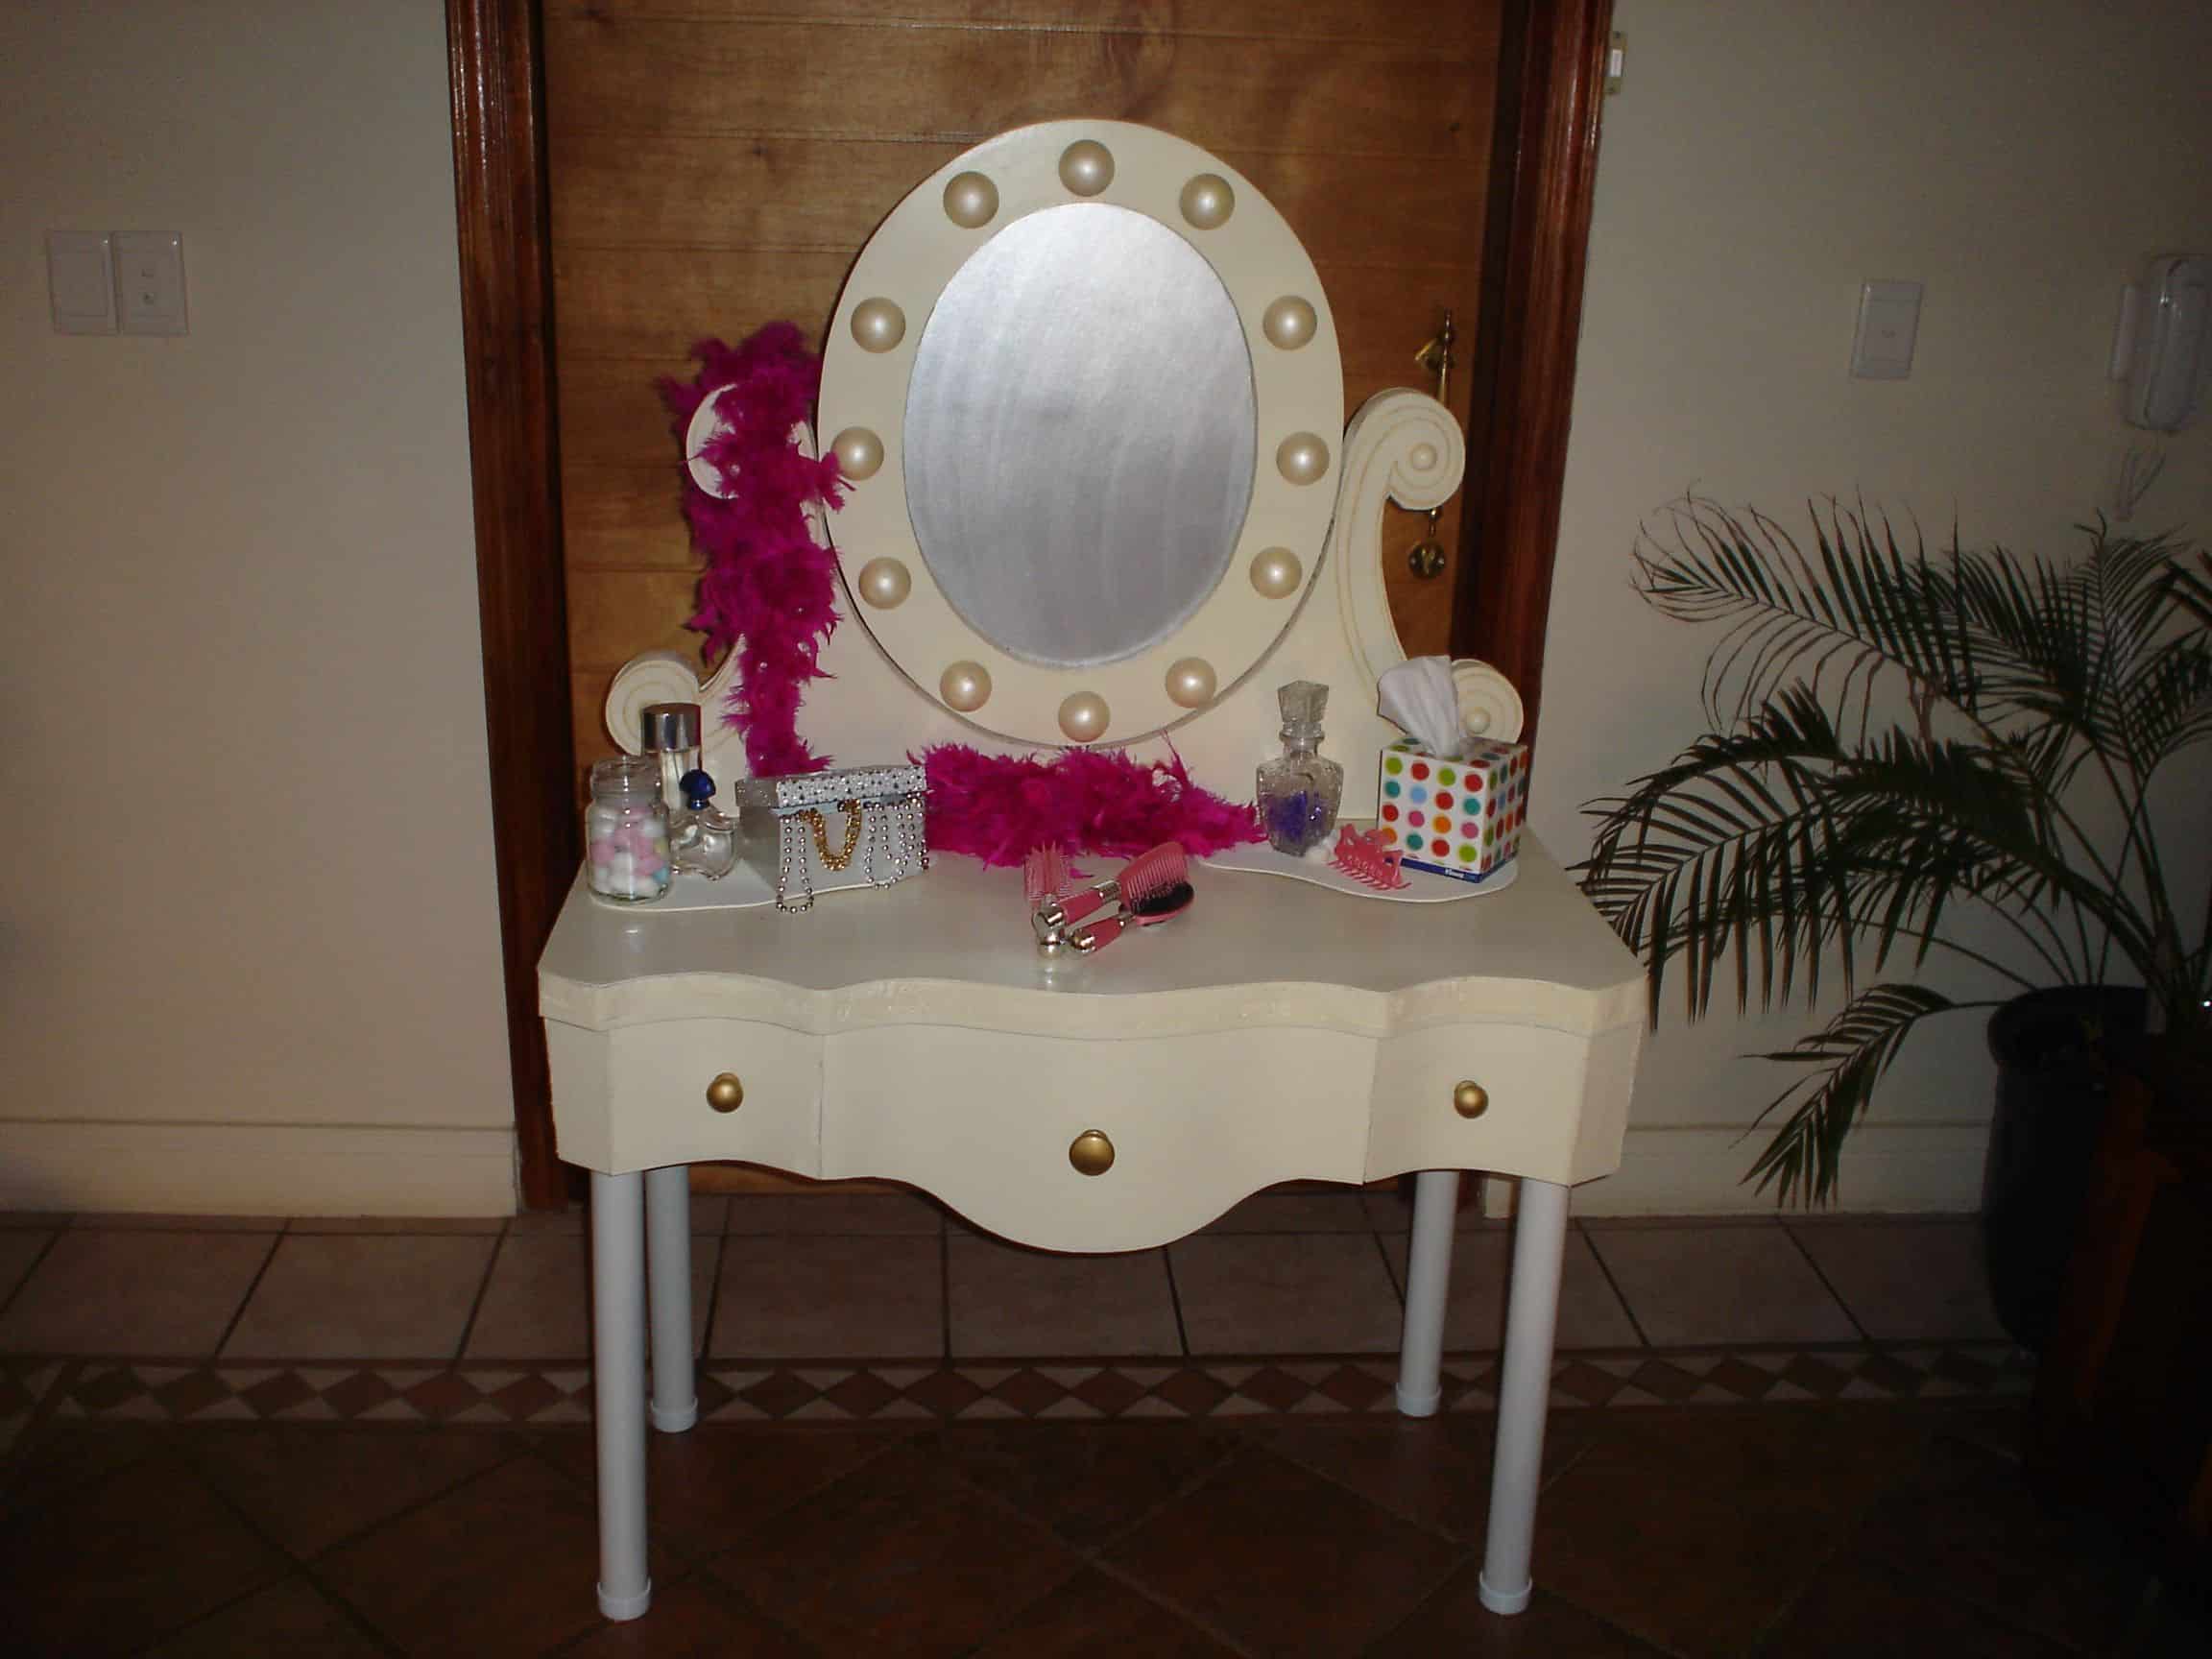 A vanity table with a unique, eye-catching design